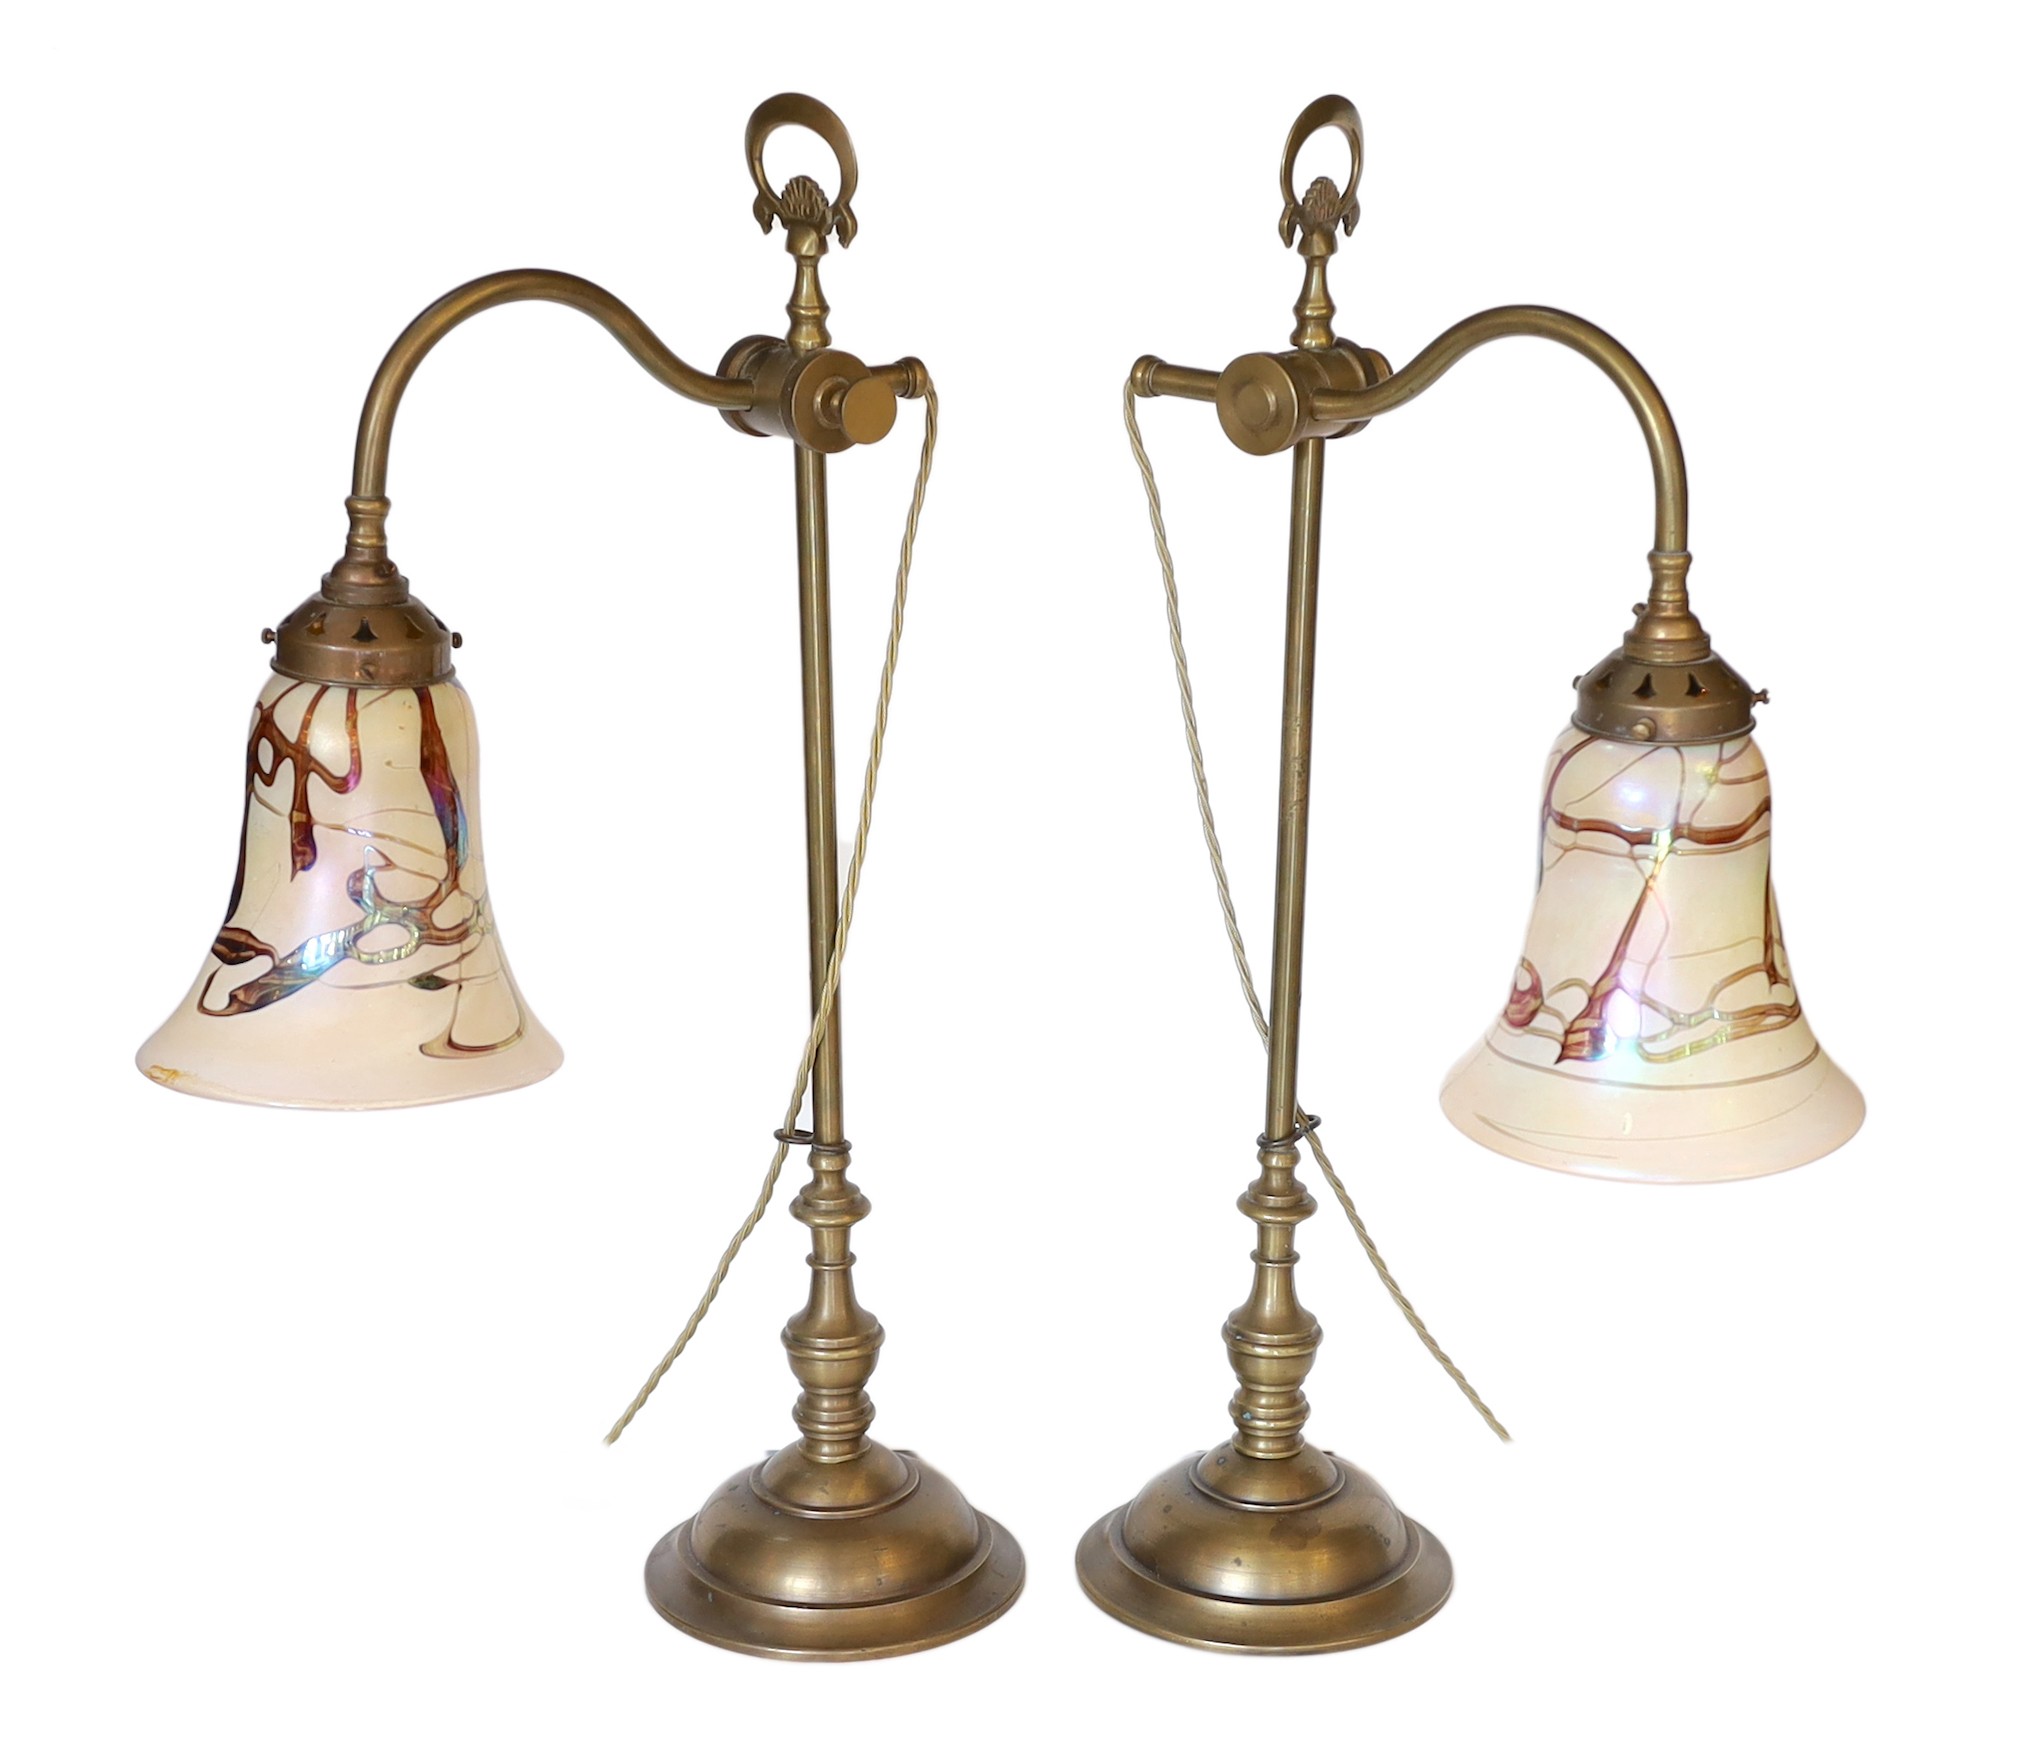 A pair of Edwardian style brass desk lamps with loetz style glass shades, height 61cm